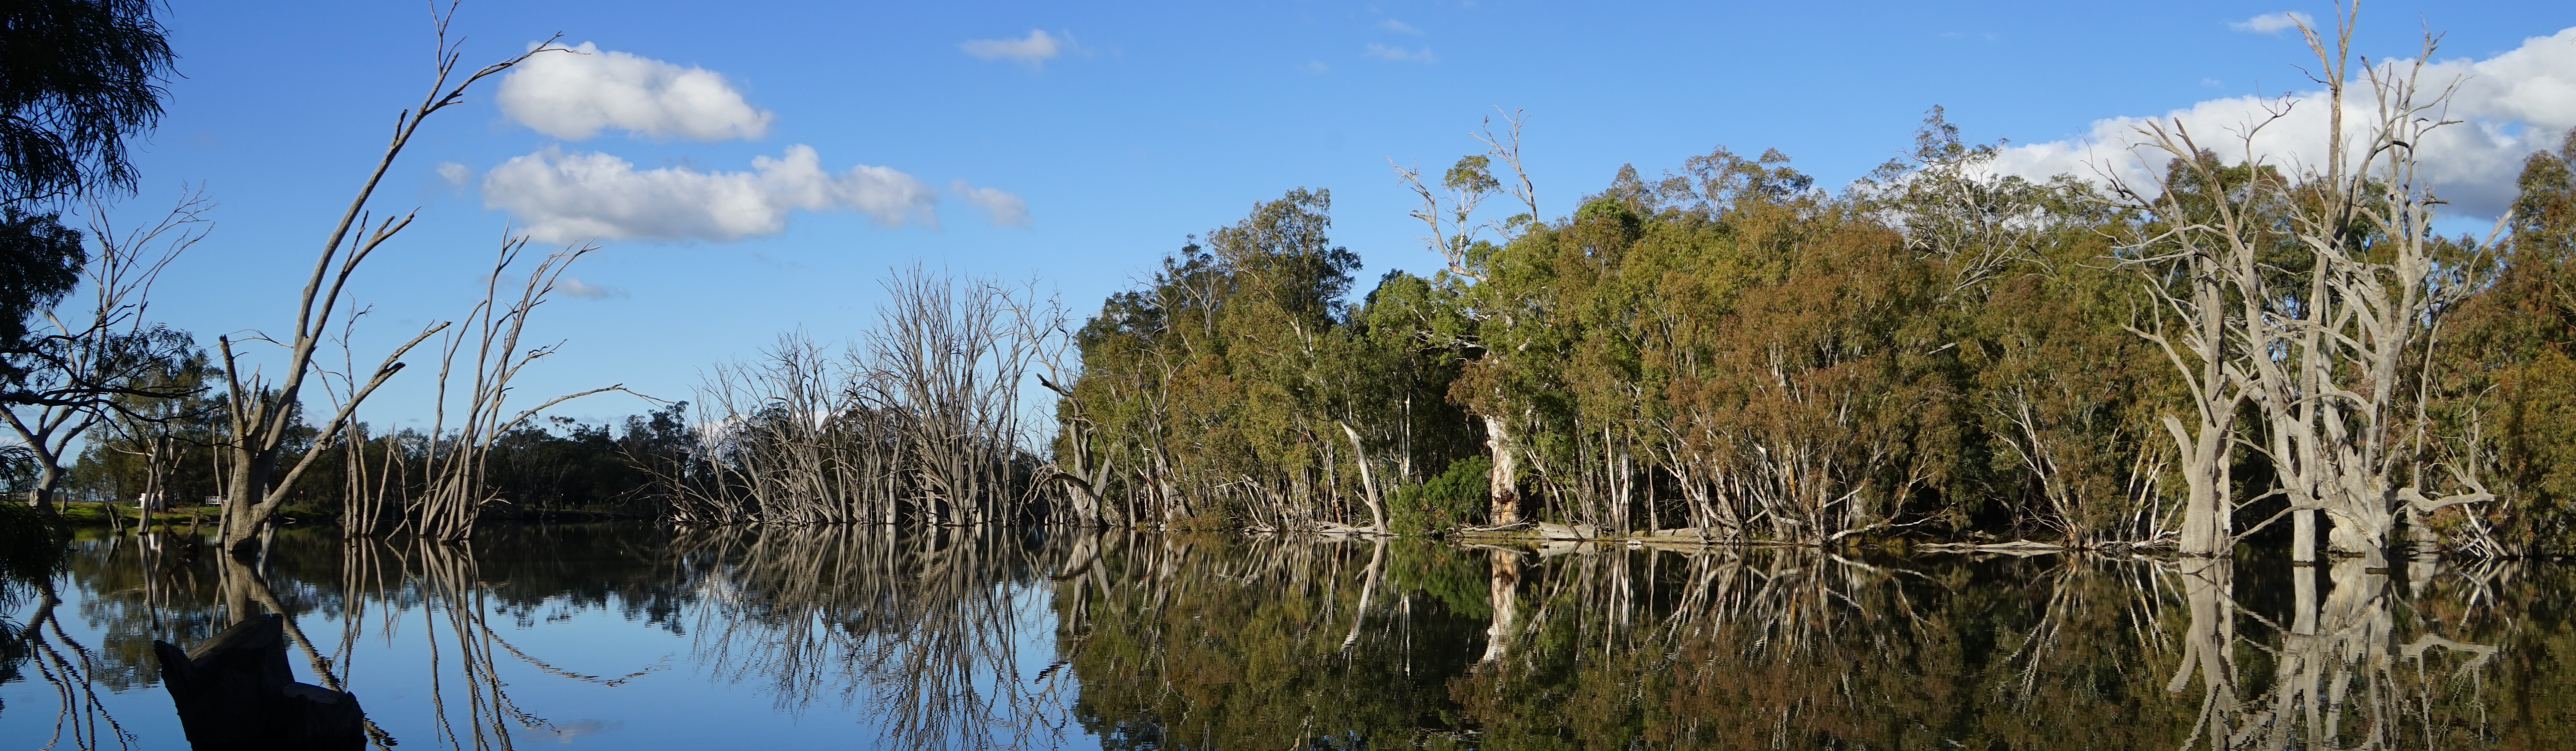 Perfect still water creates mirror to sky with drowned trees in Hay Weirpool, Murrumbidgee River